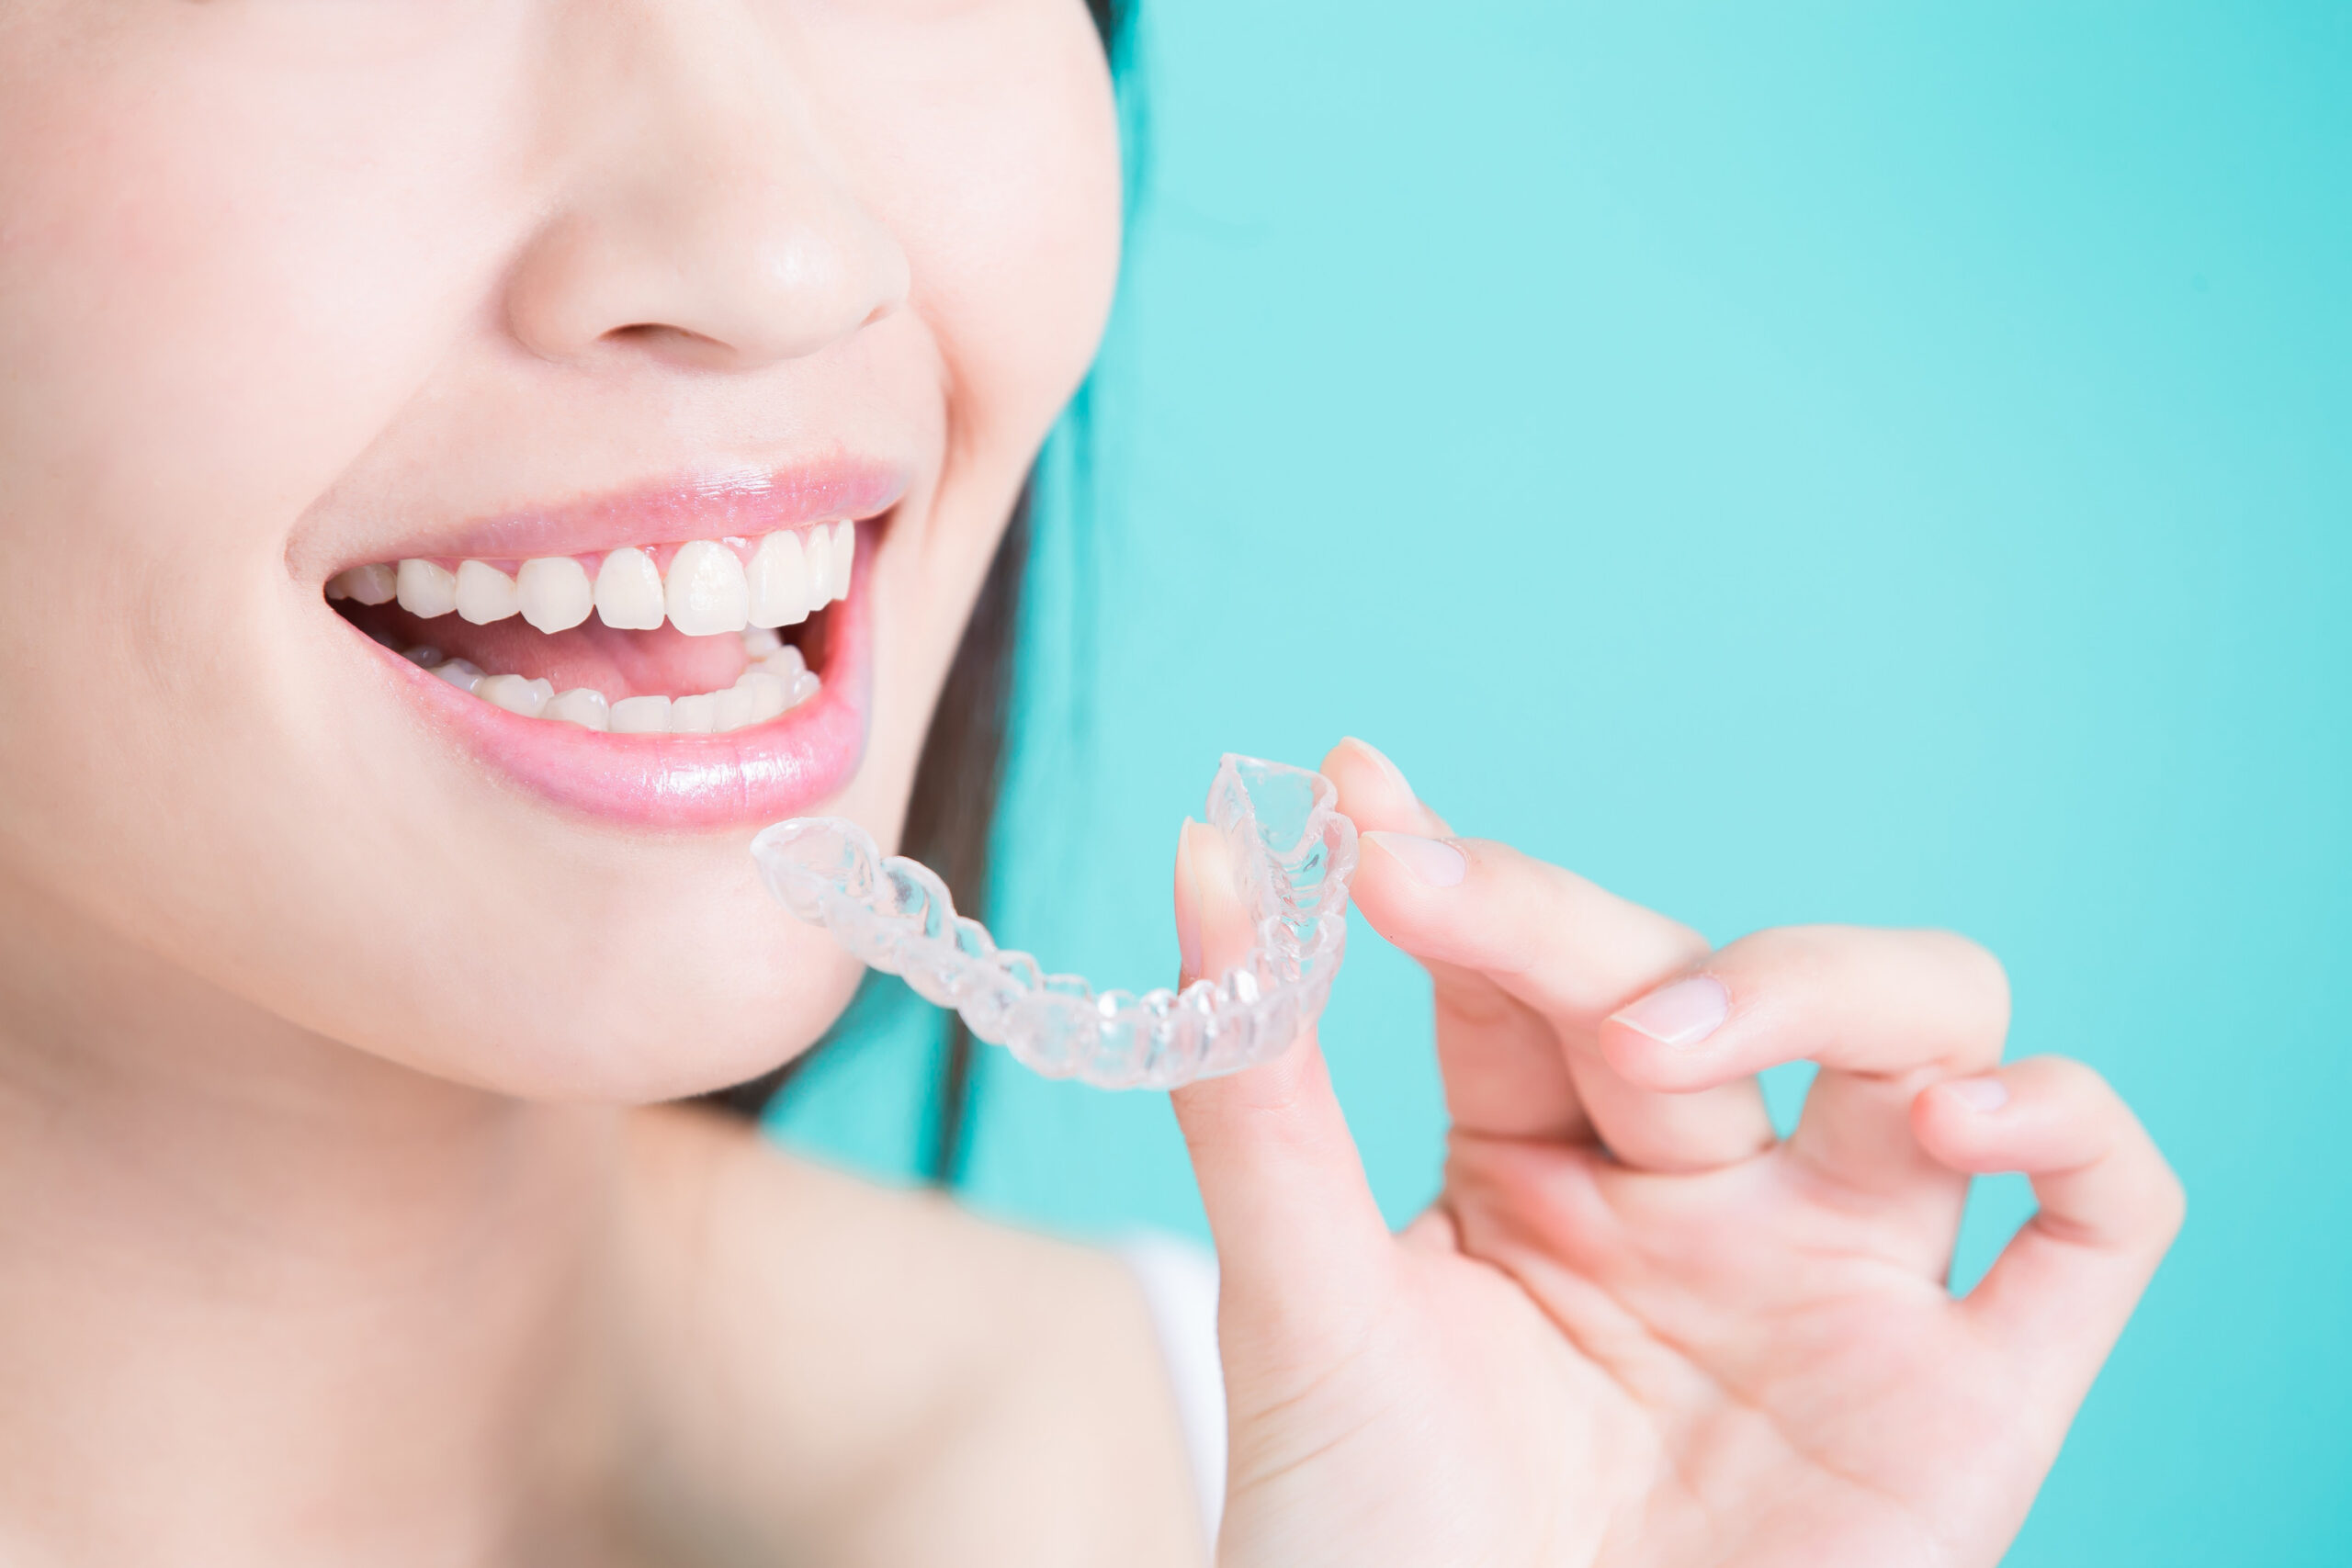 Is it Possible to get Invisalign Aligners for Bottom Teeth Only